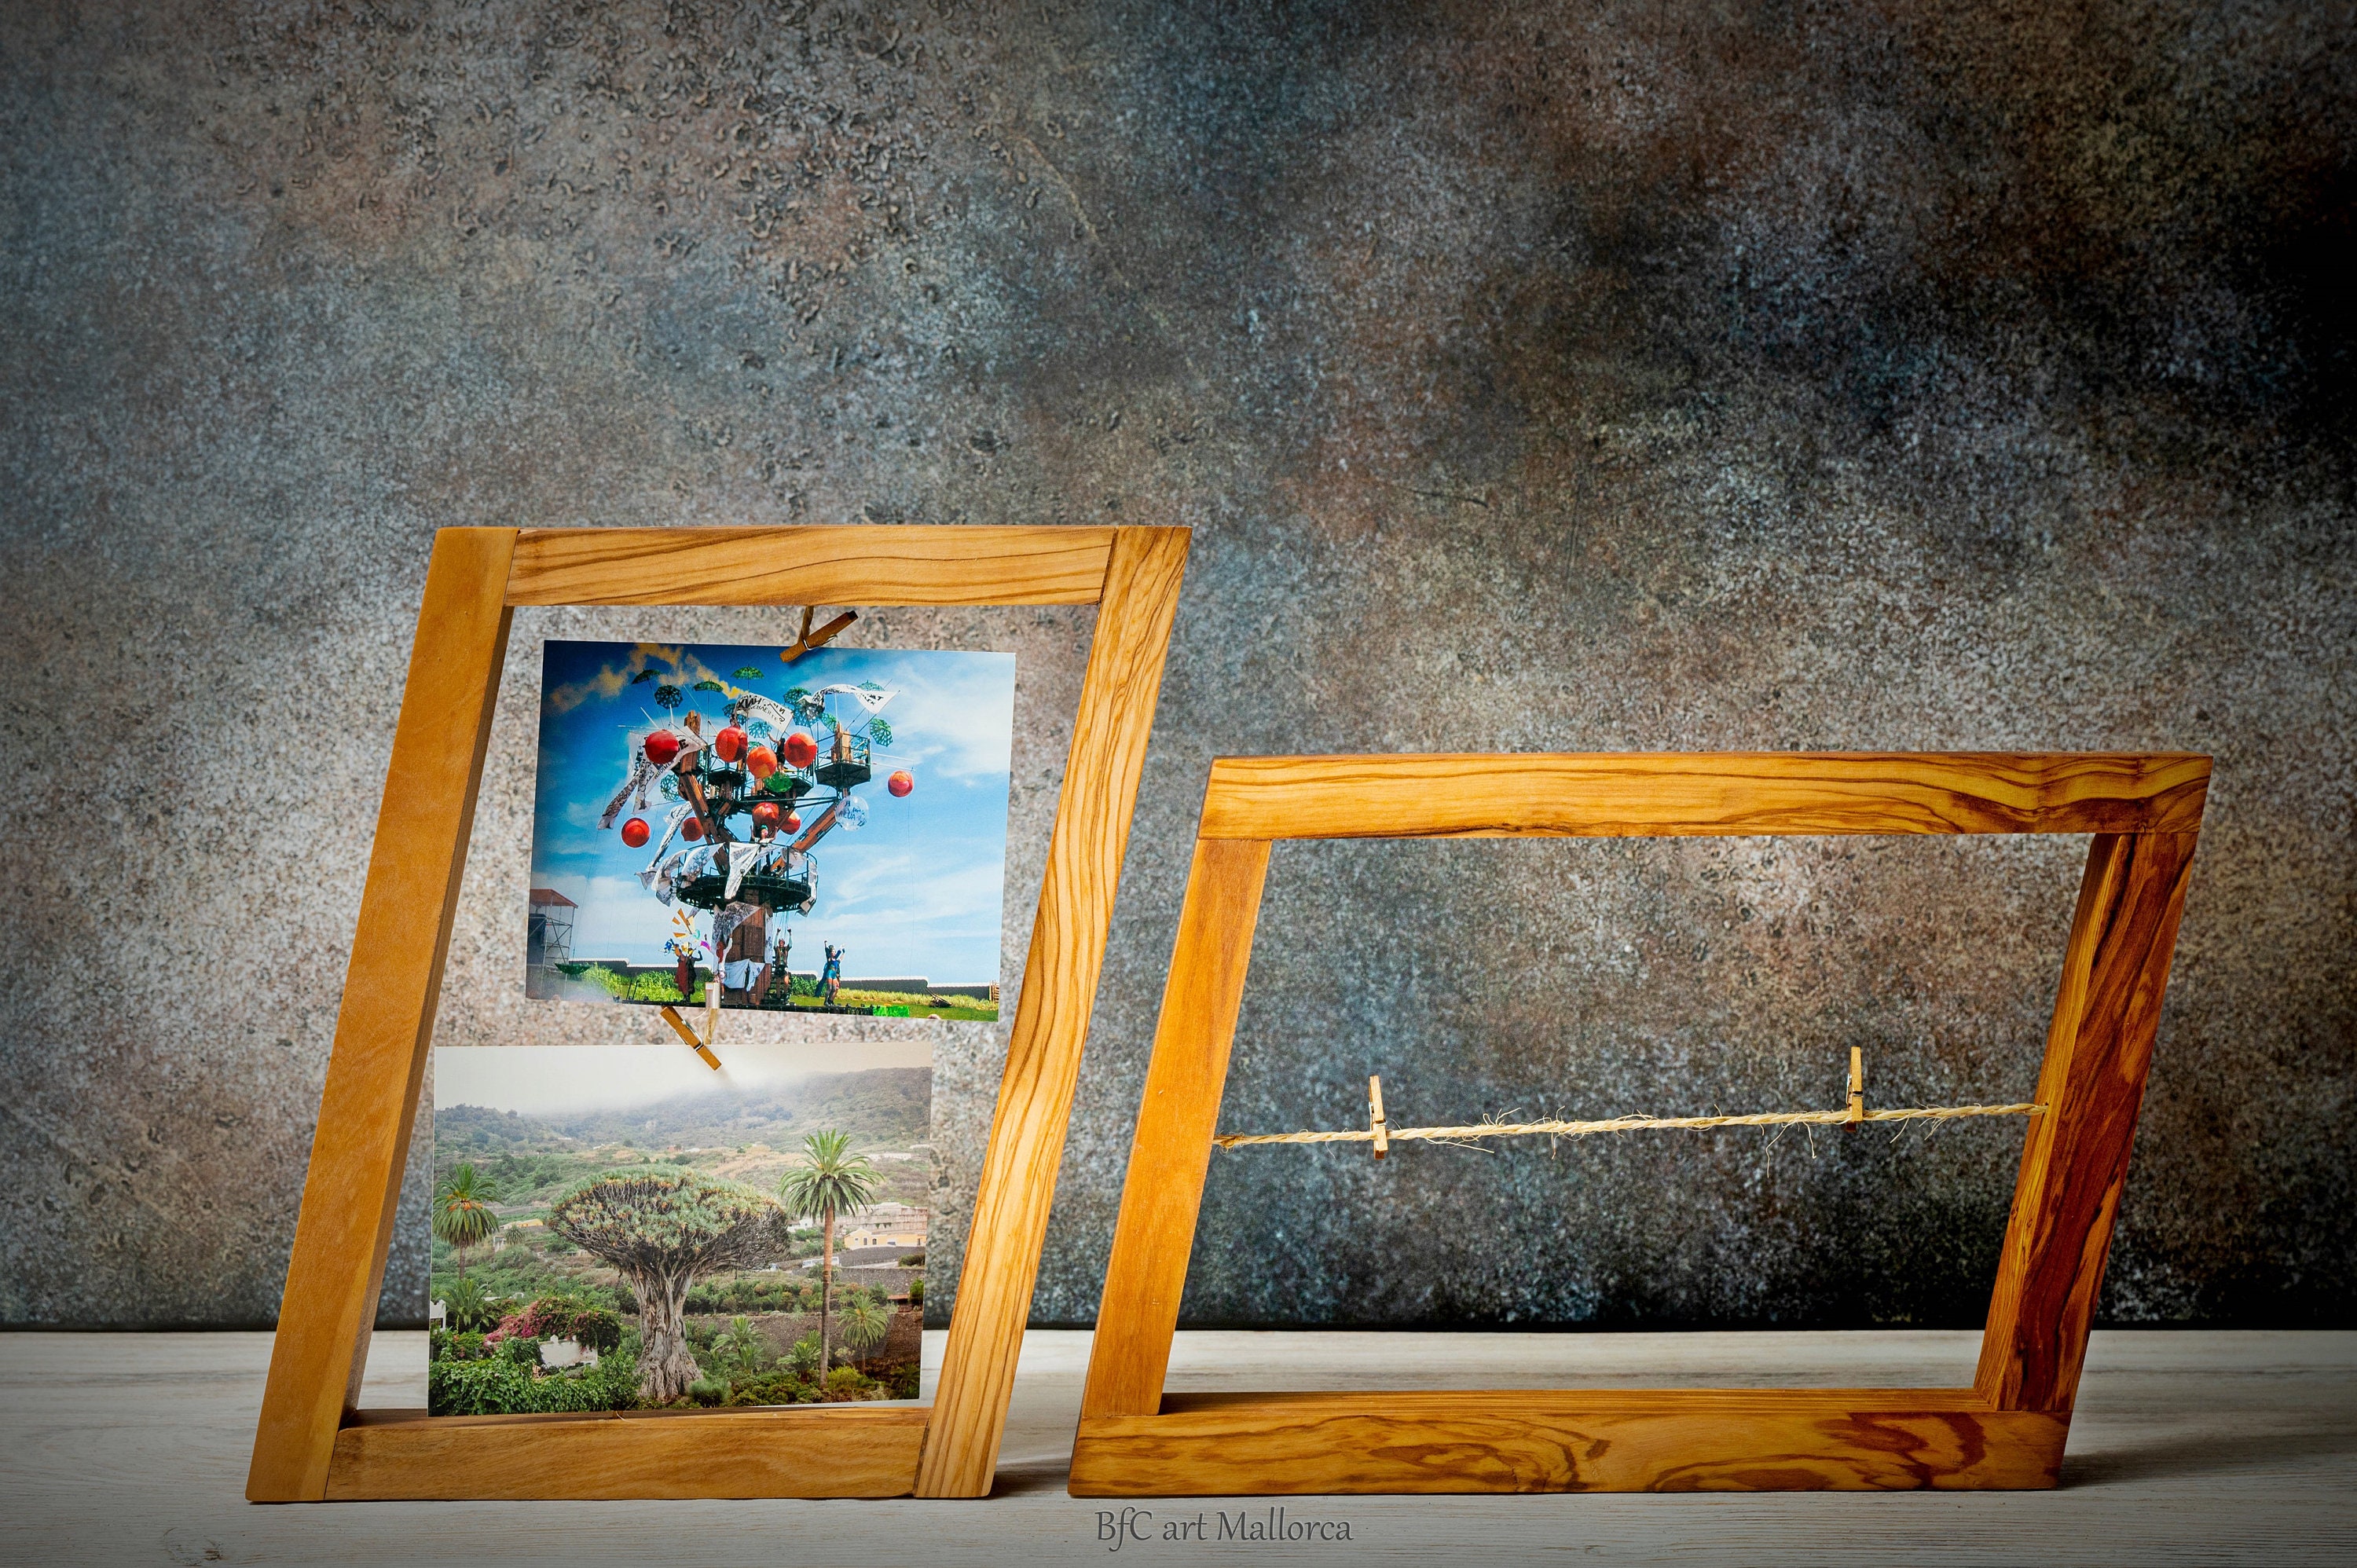 Rustic wooden Life is beautiful picture frame glass art — Modern Memory  Design Picture frames